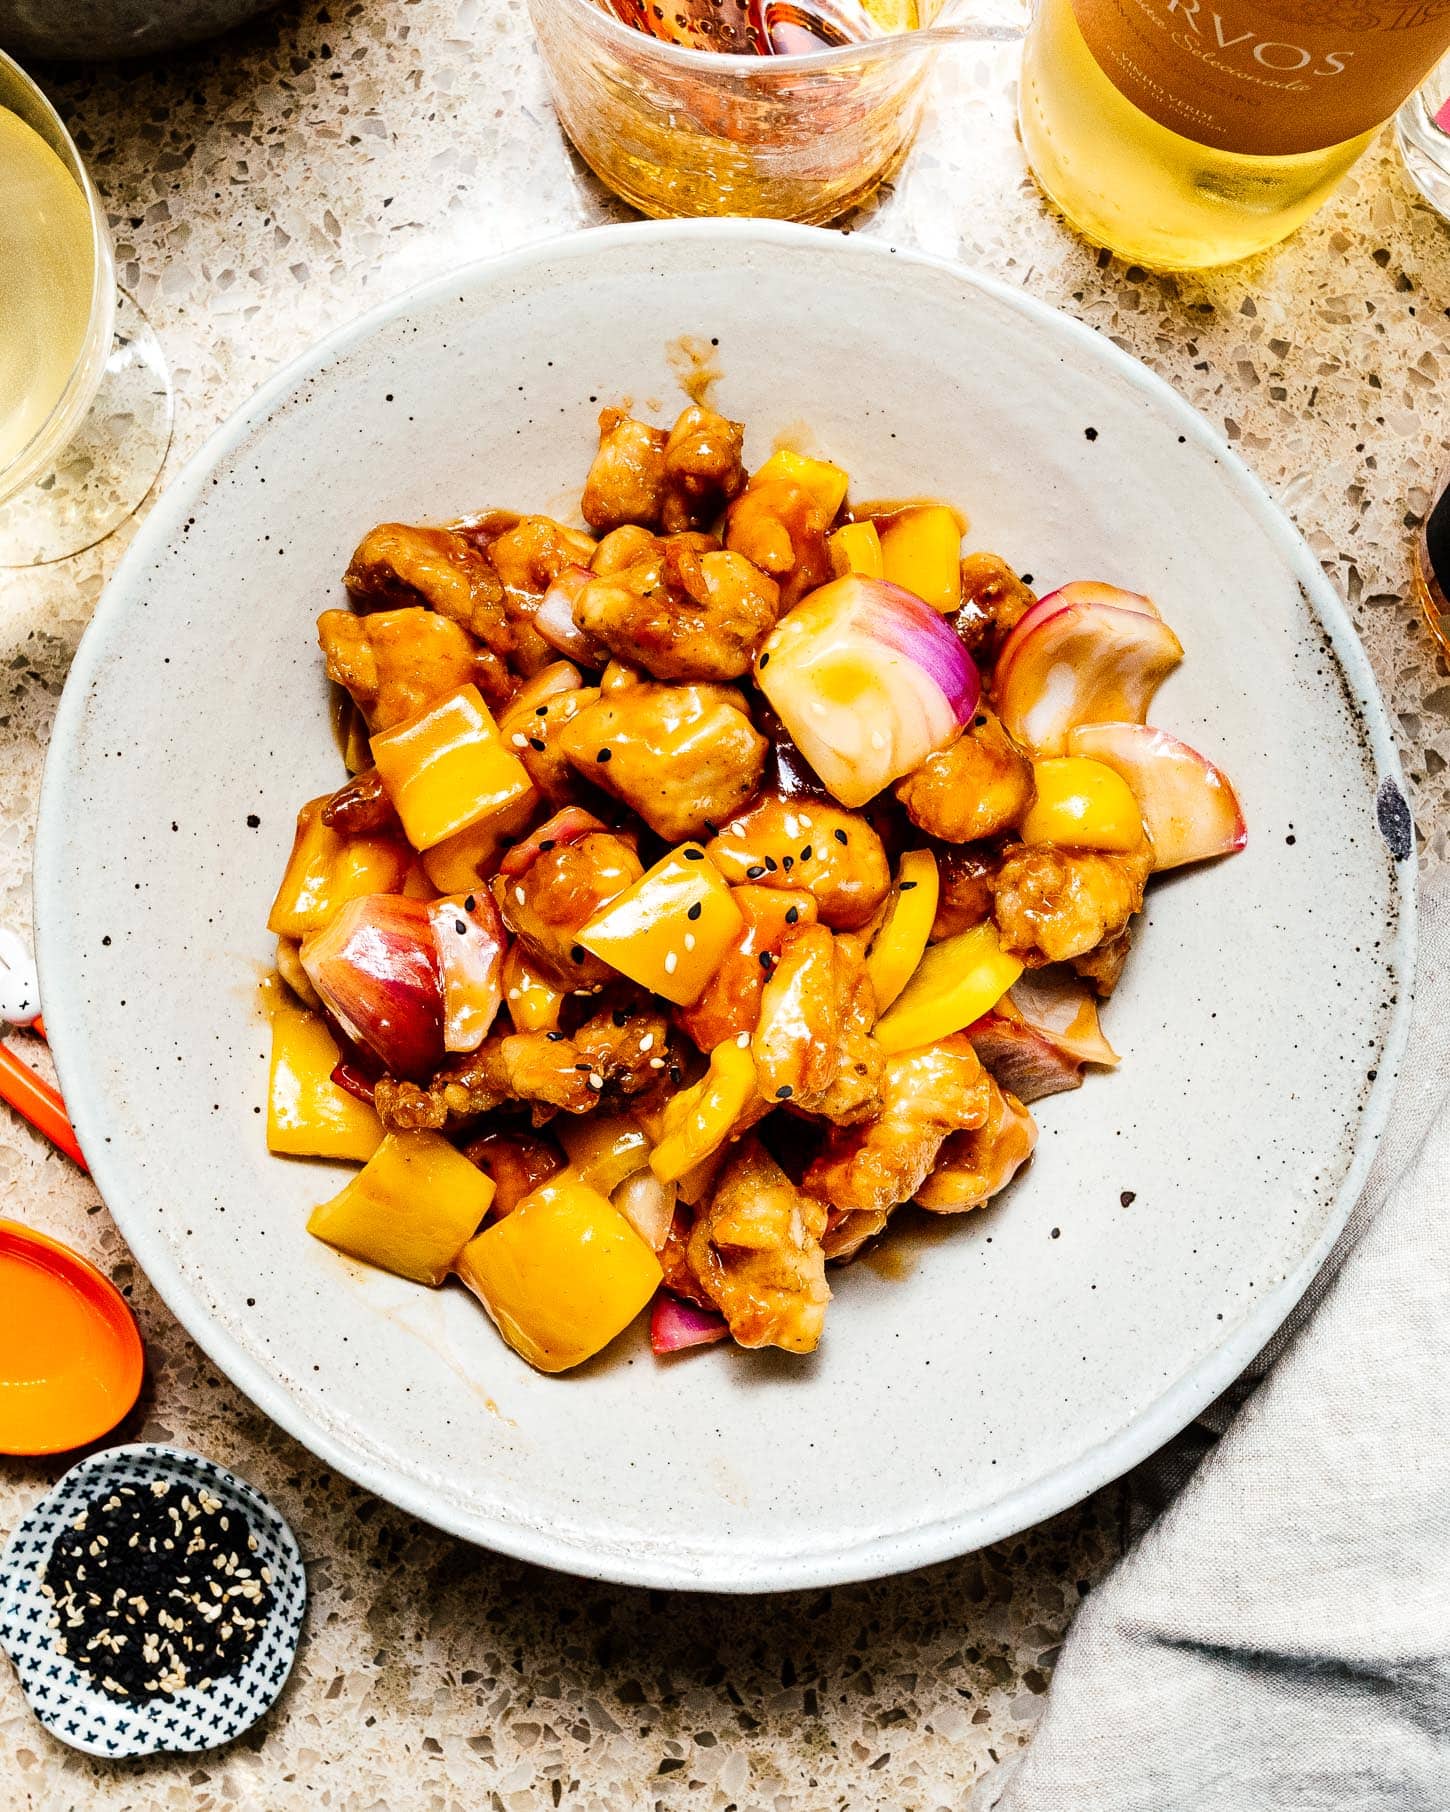 How to make sweet and sour chicken | www.iamafoodblog.com